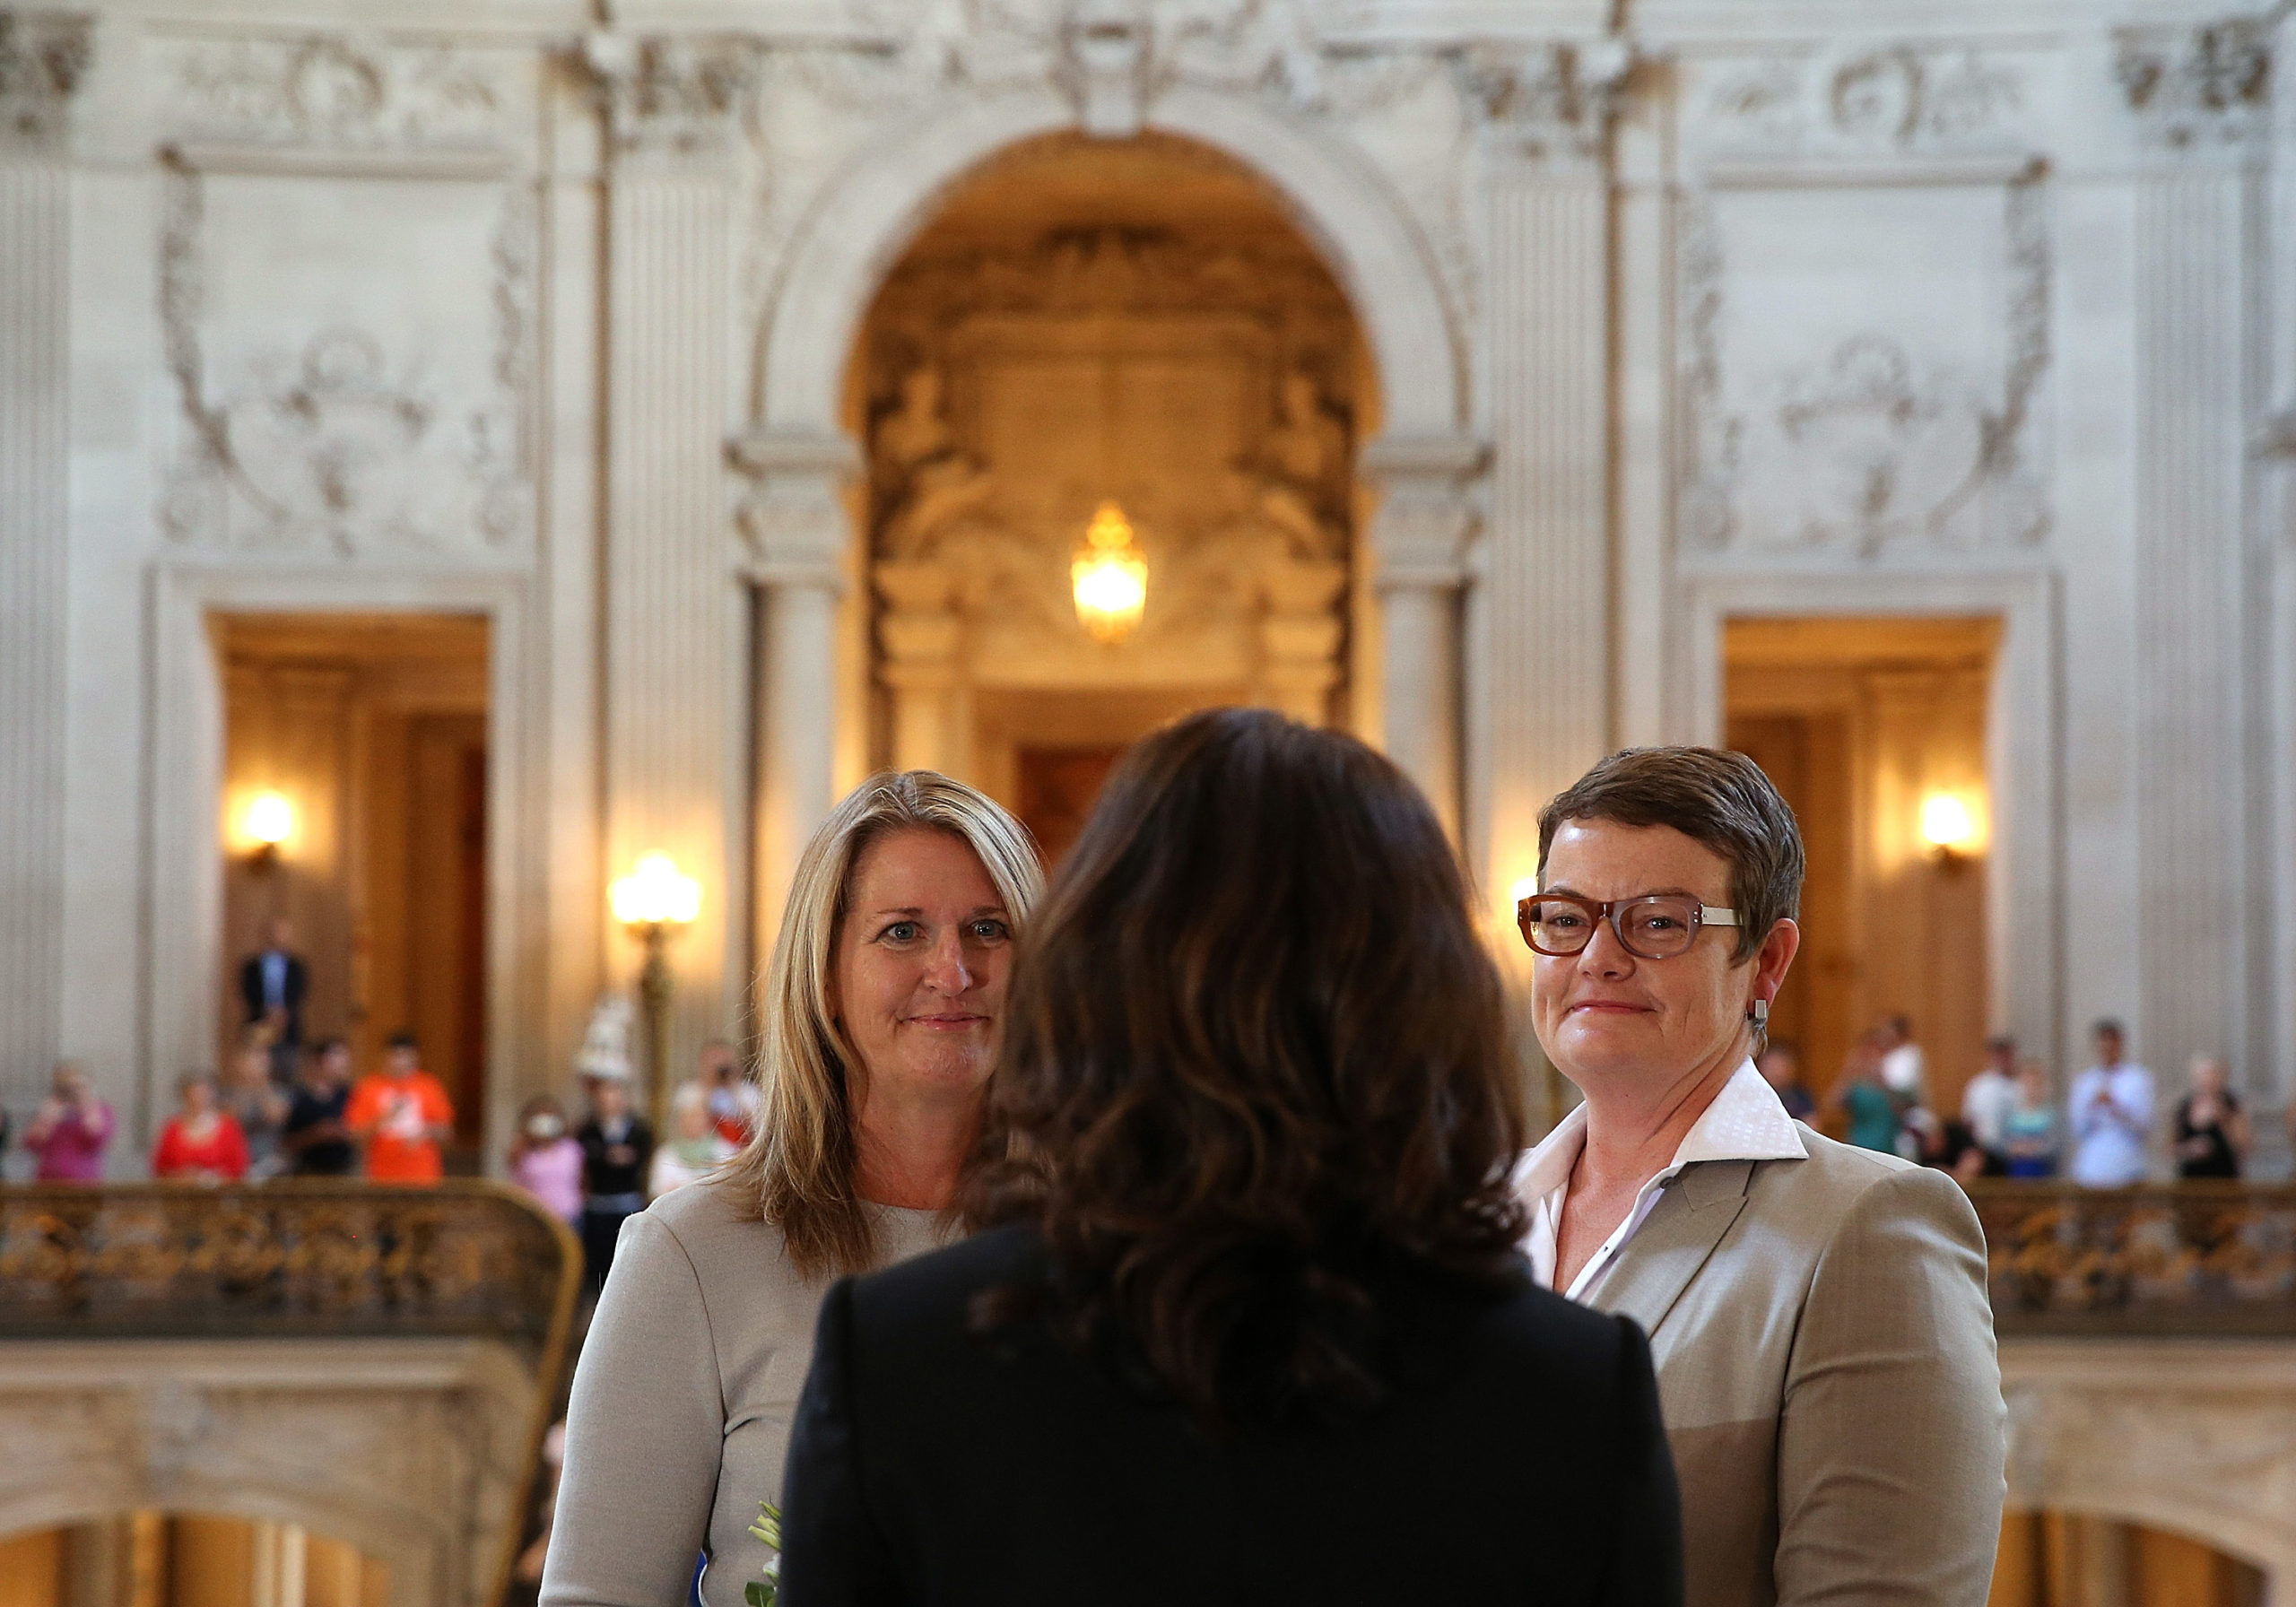 Same-sex couple Sandy Stier and Kris Perry are married at San Francisco City Hall by California Attorney General Kamala Harris on June 28, 2013 